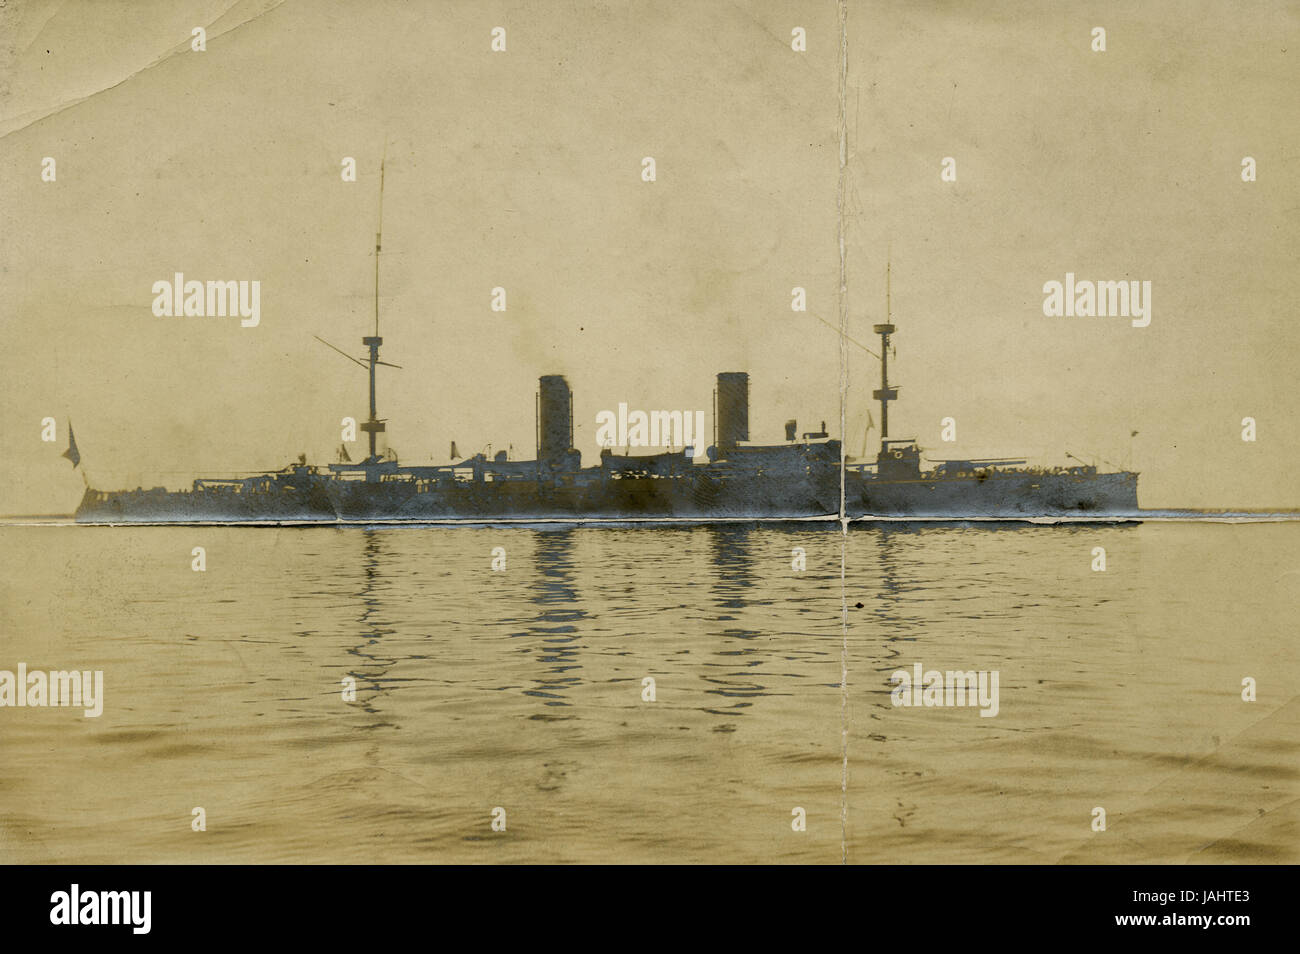 Antique c1908 photograph, USS Cleveland in the Philippine Islands. The USS Cleveland (C-19/PG-33/CL-21) was a United States Navy Denver-class protected cruiser. She was launched 28 September 1901 by Bath Iron Works, Bath, Maine, and commissioned 2 November 1903. SOURCE: ORIGINAL PHOTOGRAPHIC PRINT. Stock Photo